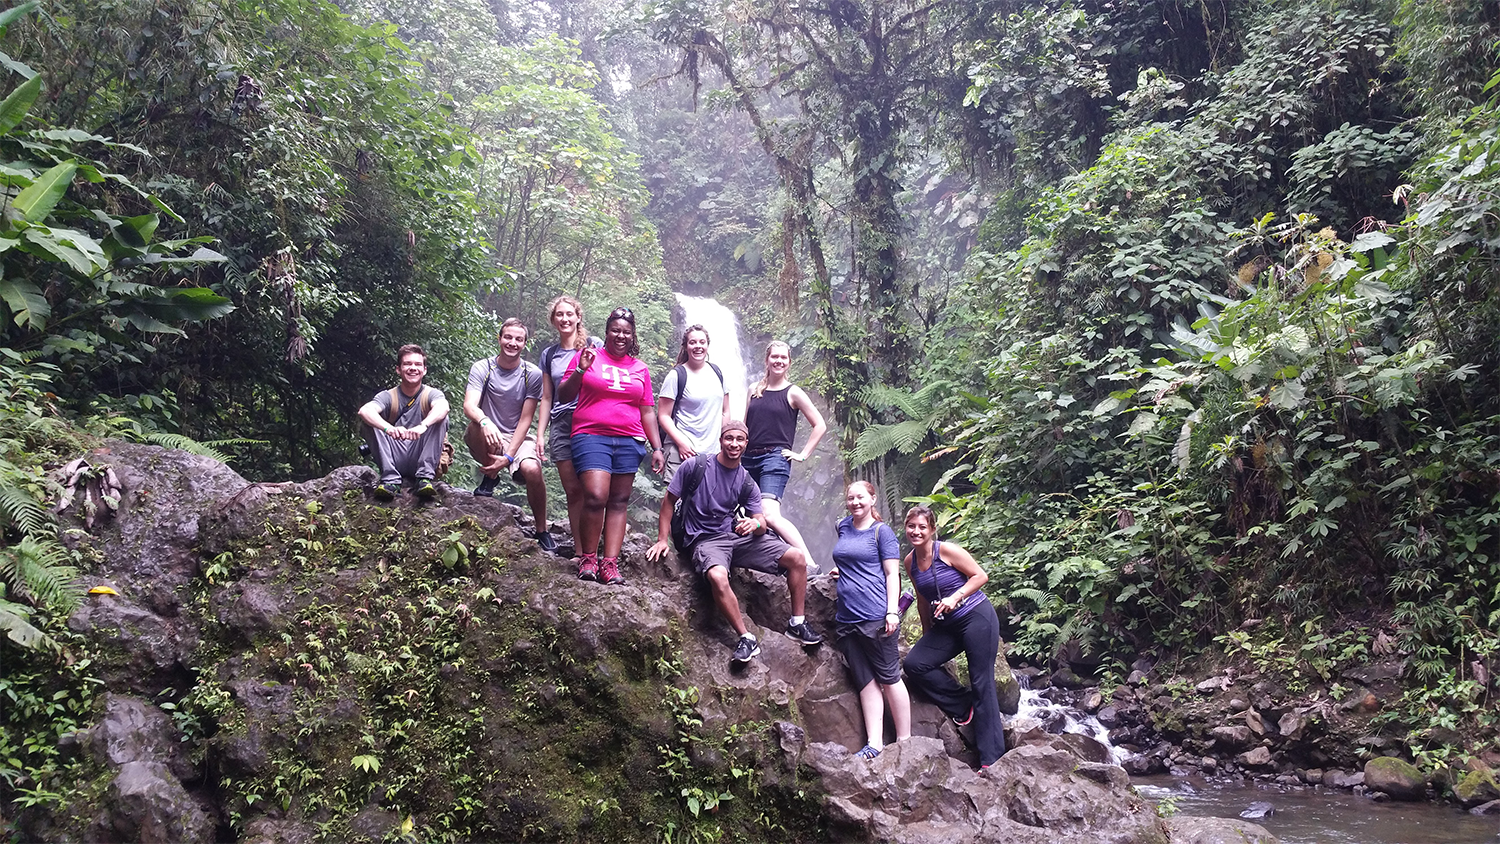 A group of students taking a group photo while on a hike in a forest in Costa Rica.